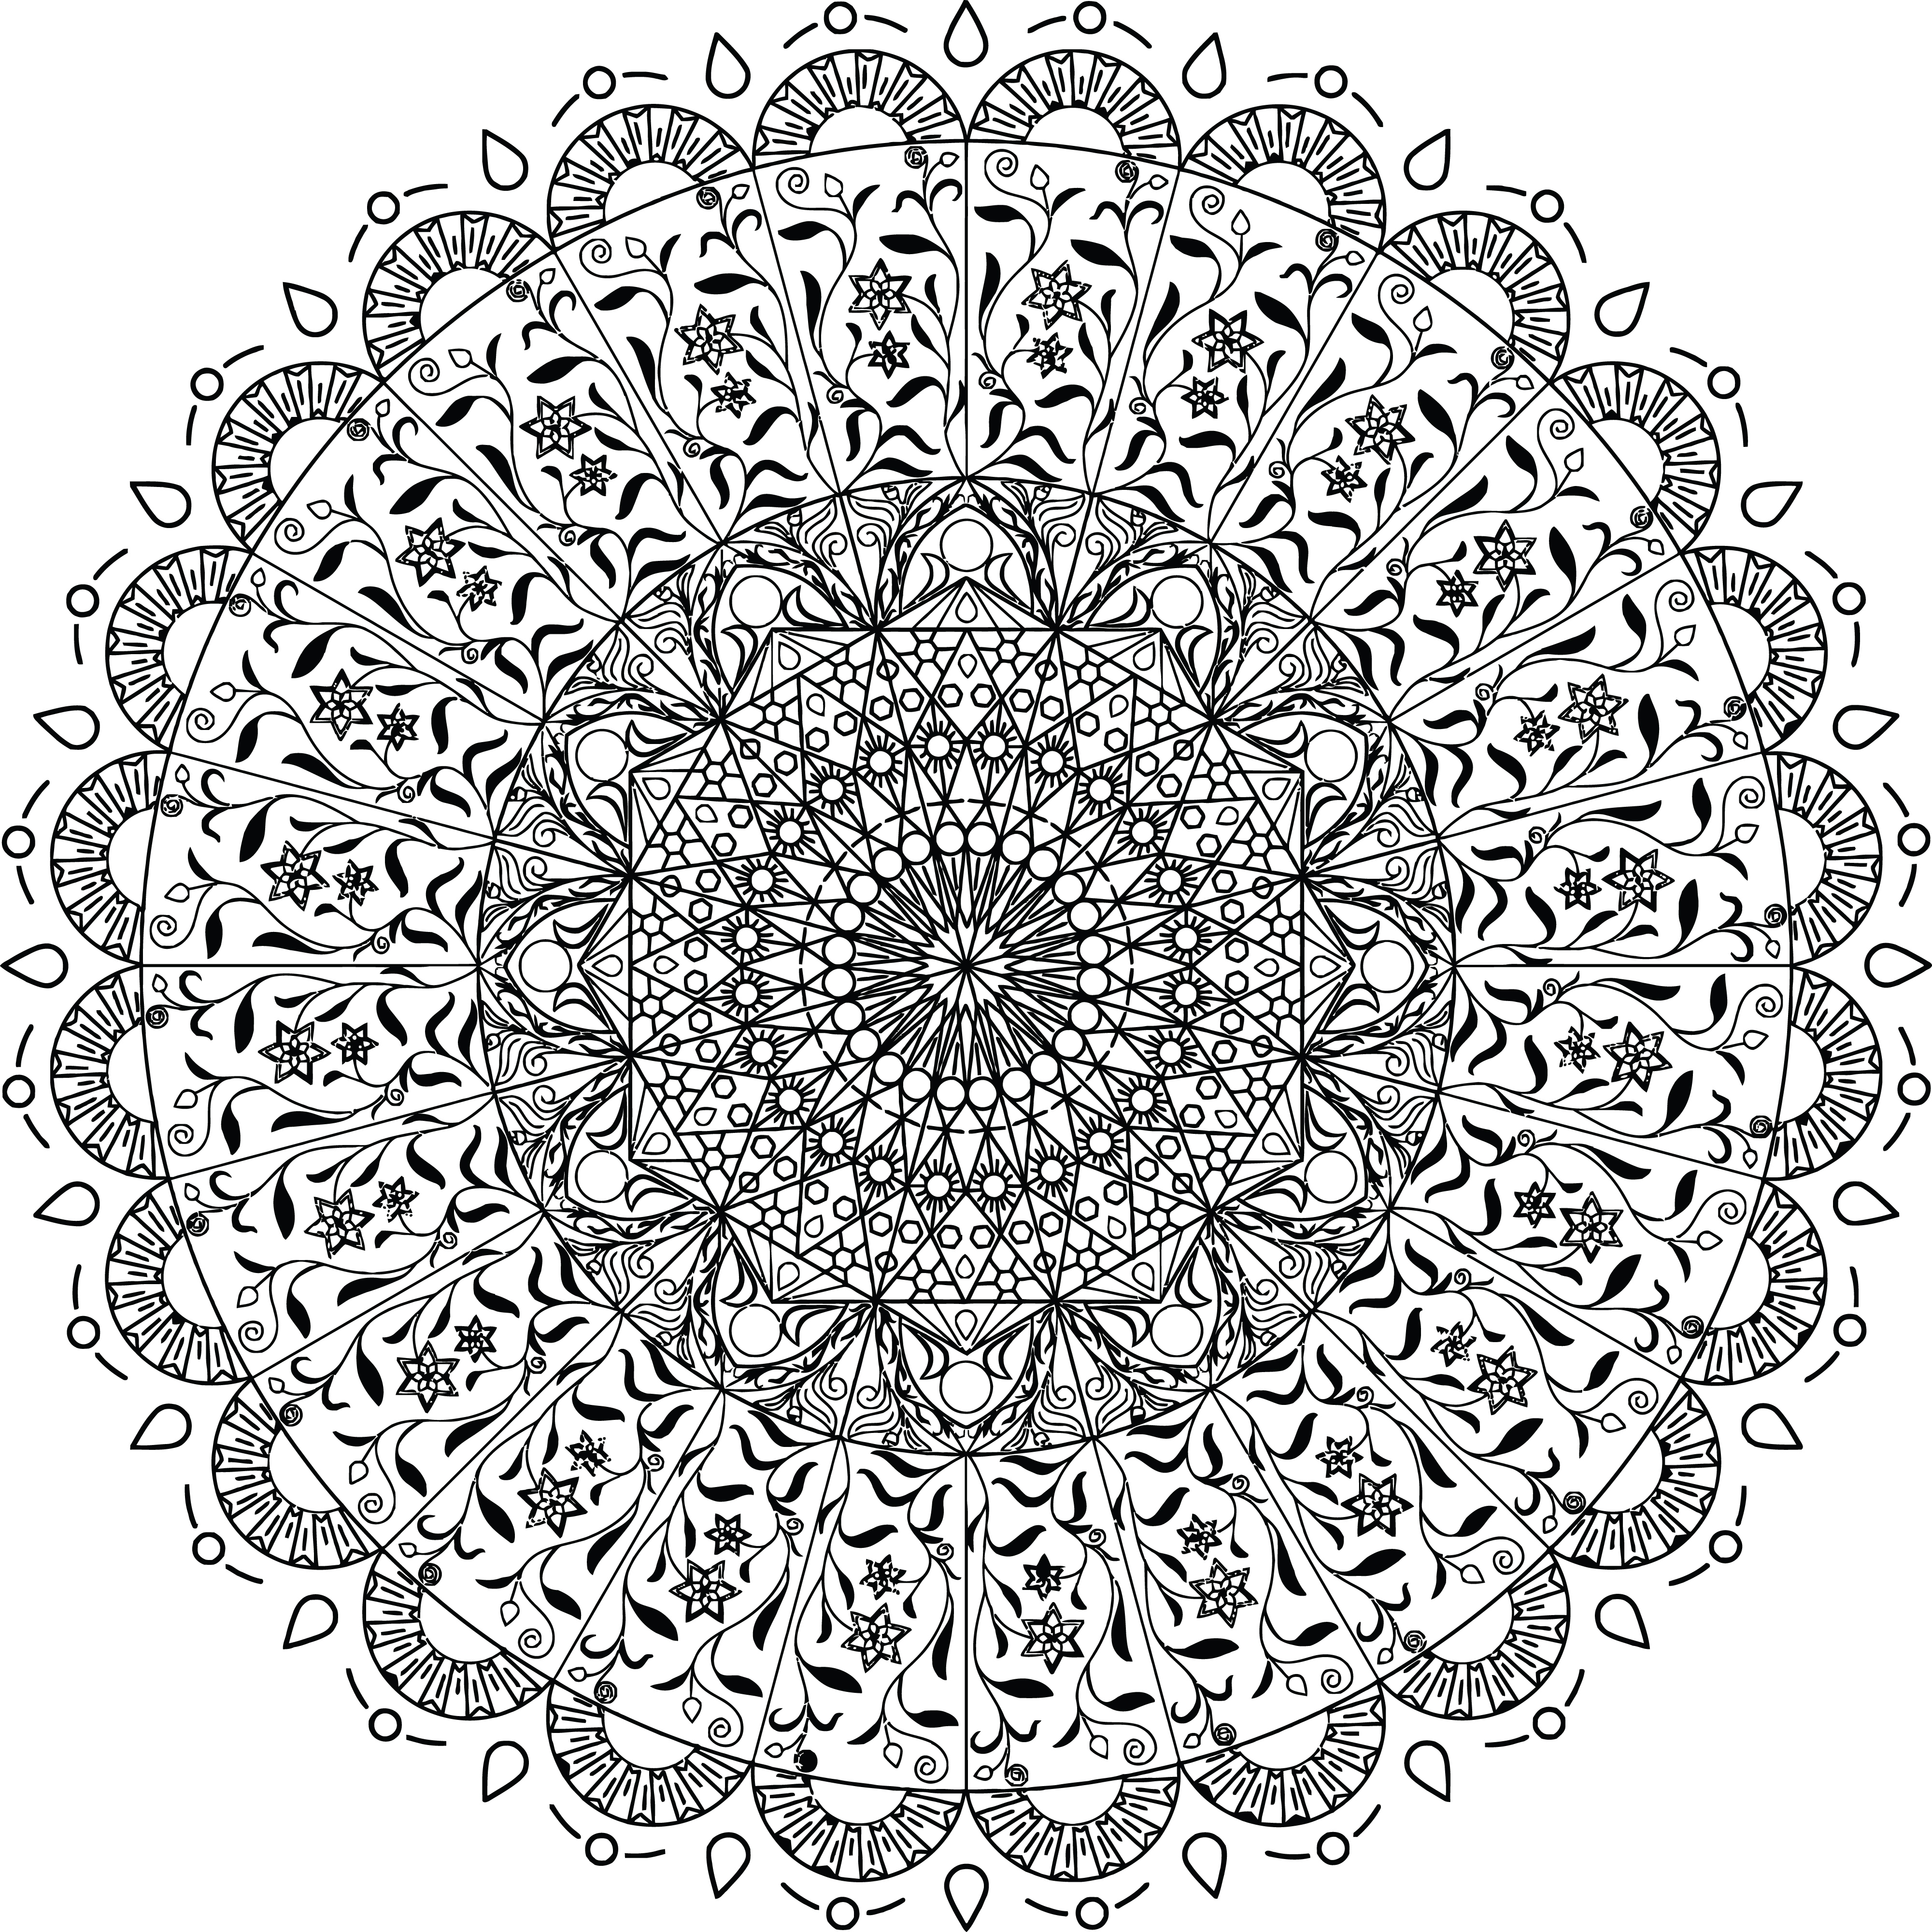 Free Clipart Of A black and white adult coloring page